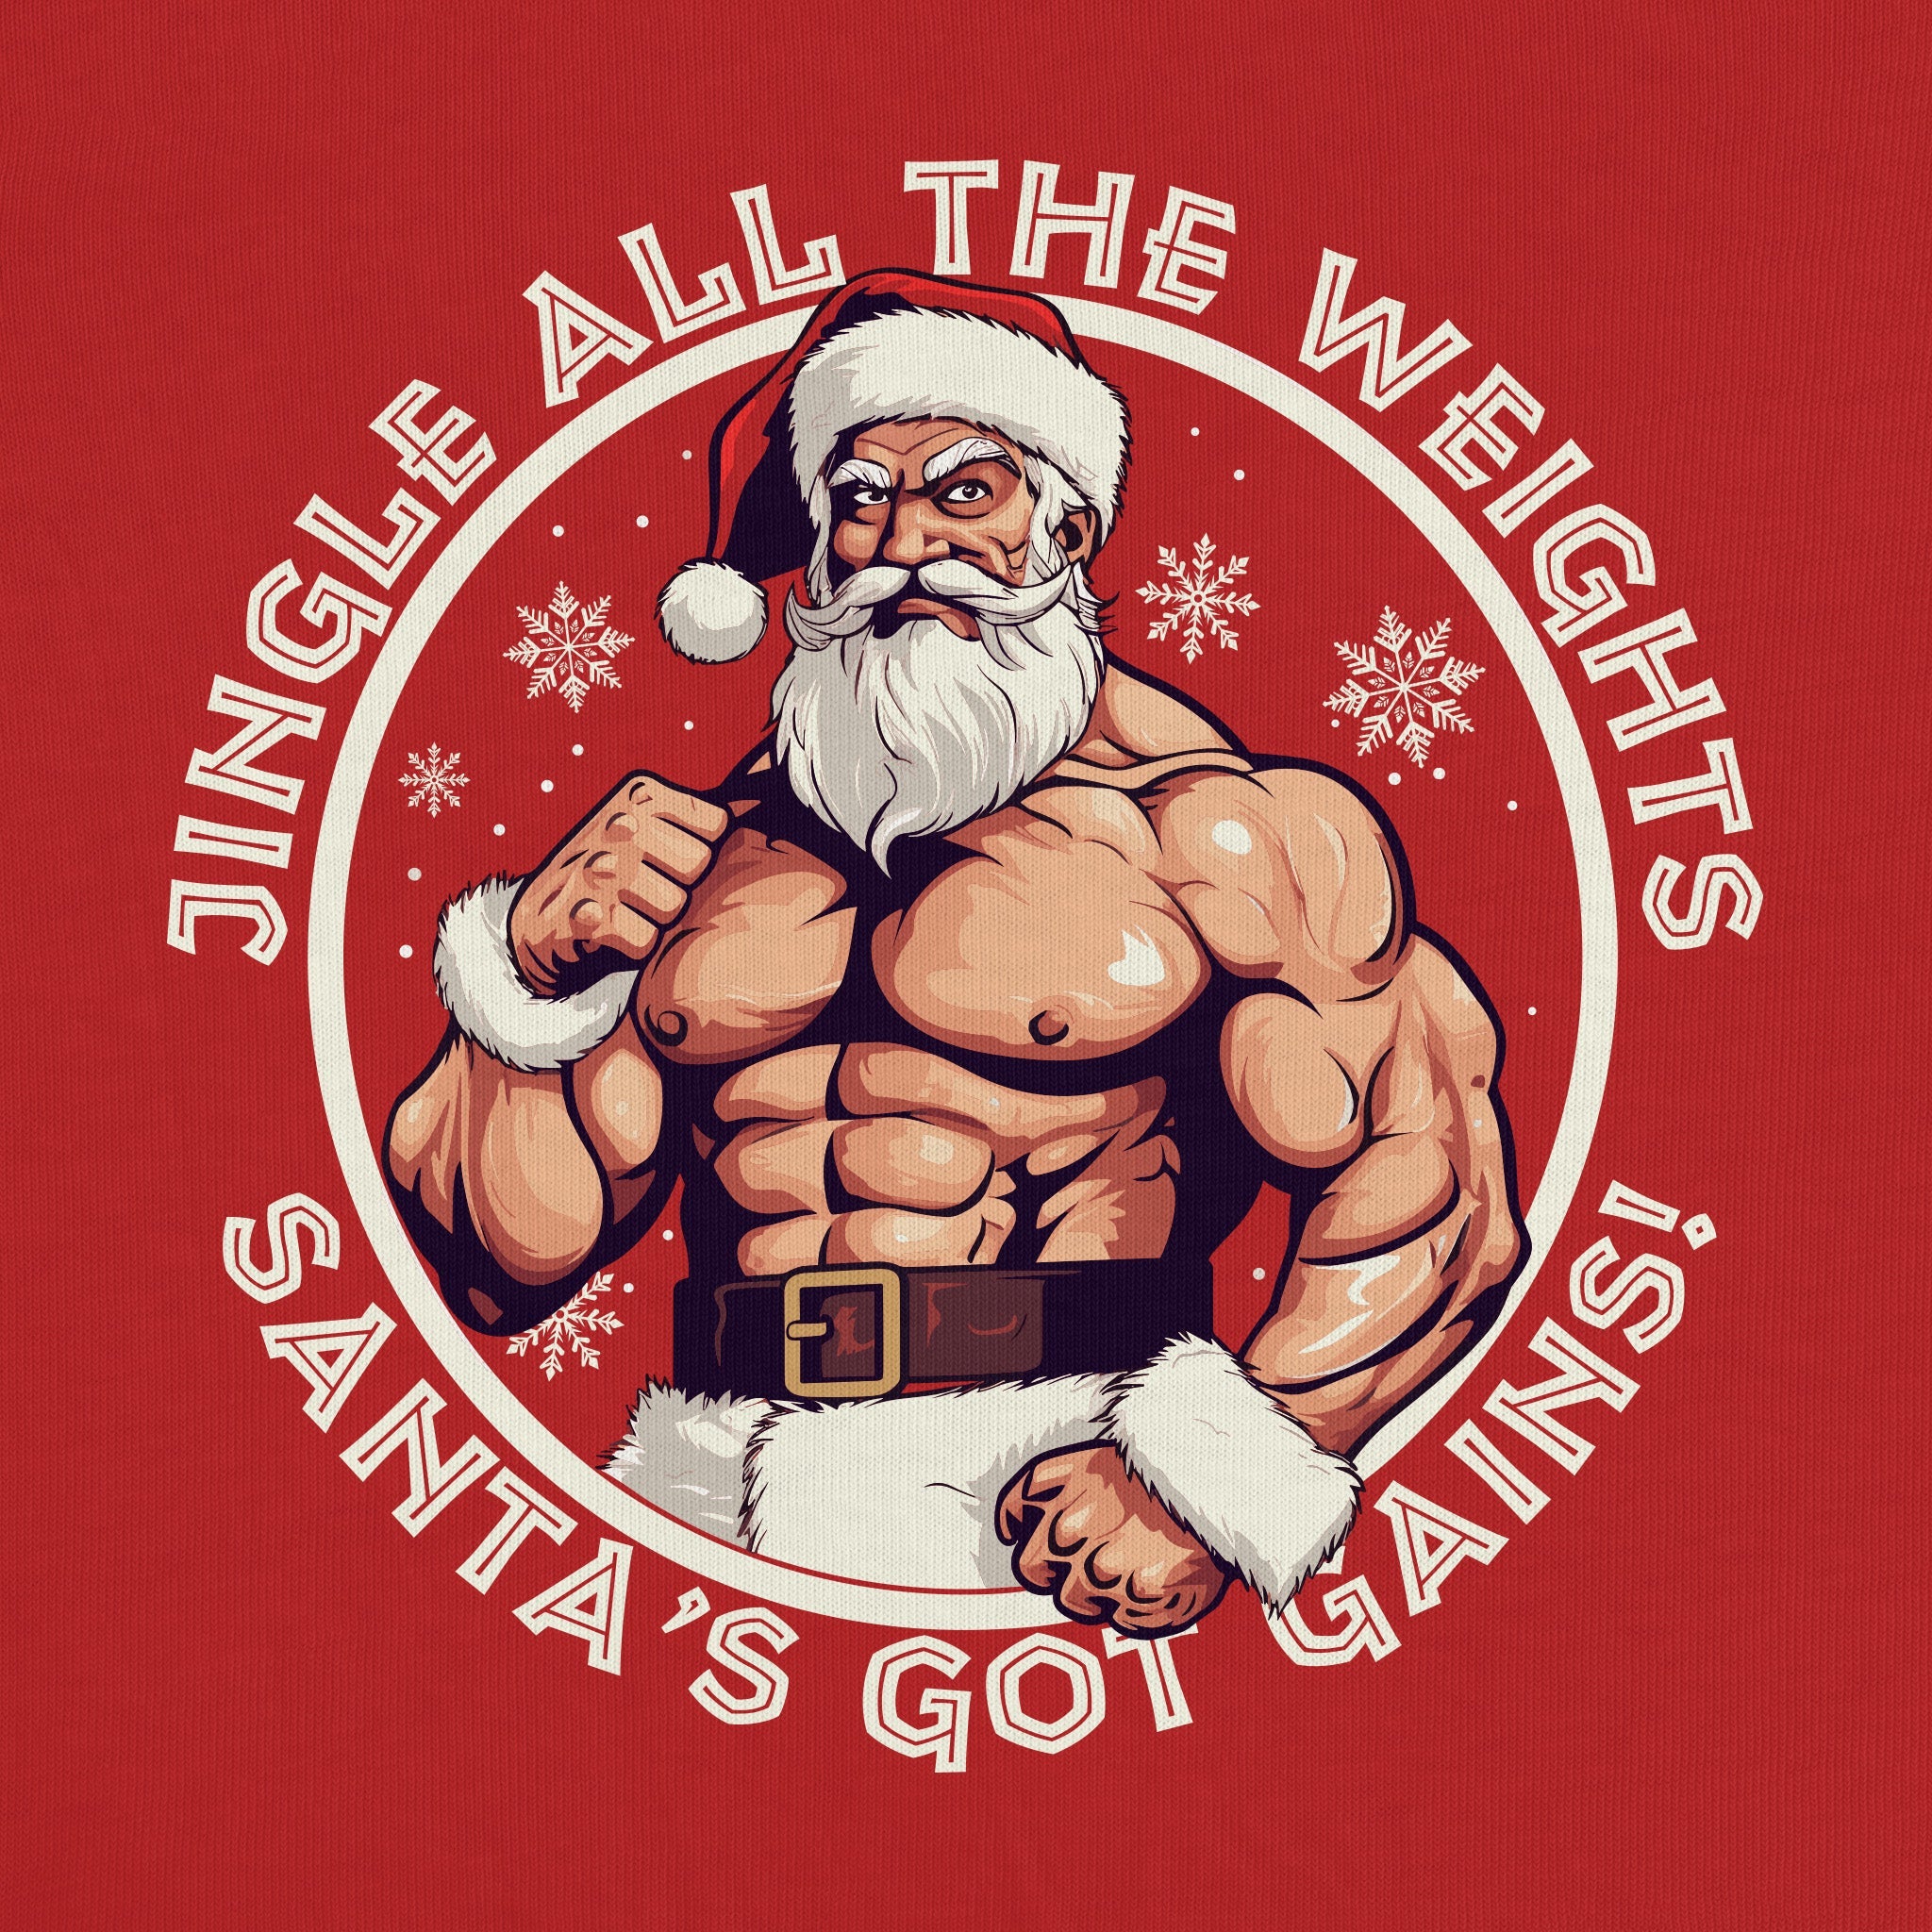 "Jingle All The Weights: Santa's Got Gains" Holiday Tank Top - Hunky Tops